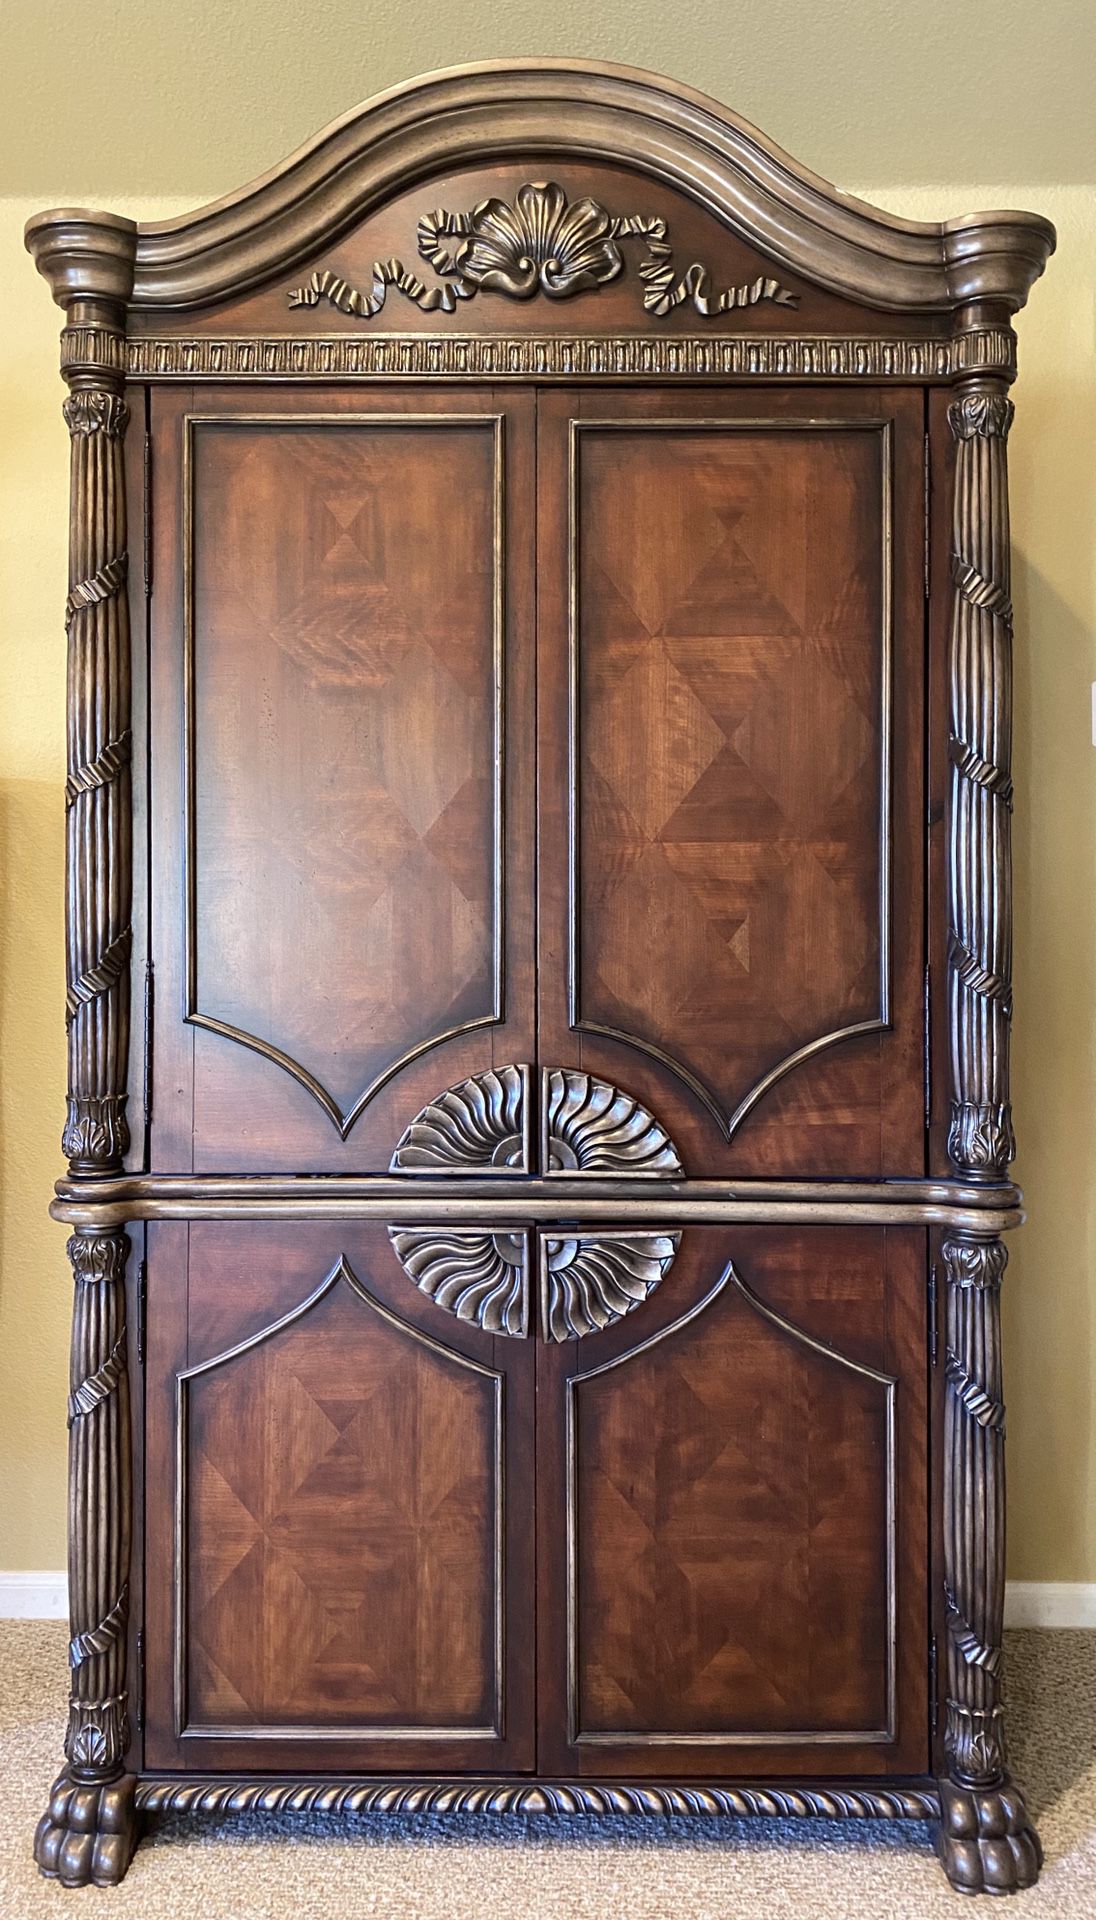 Beautiful and Ornate Armoire/TV Cabinet